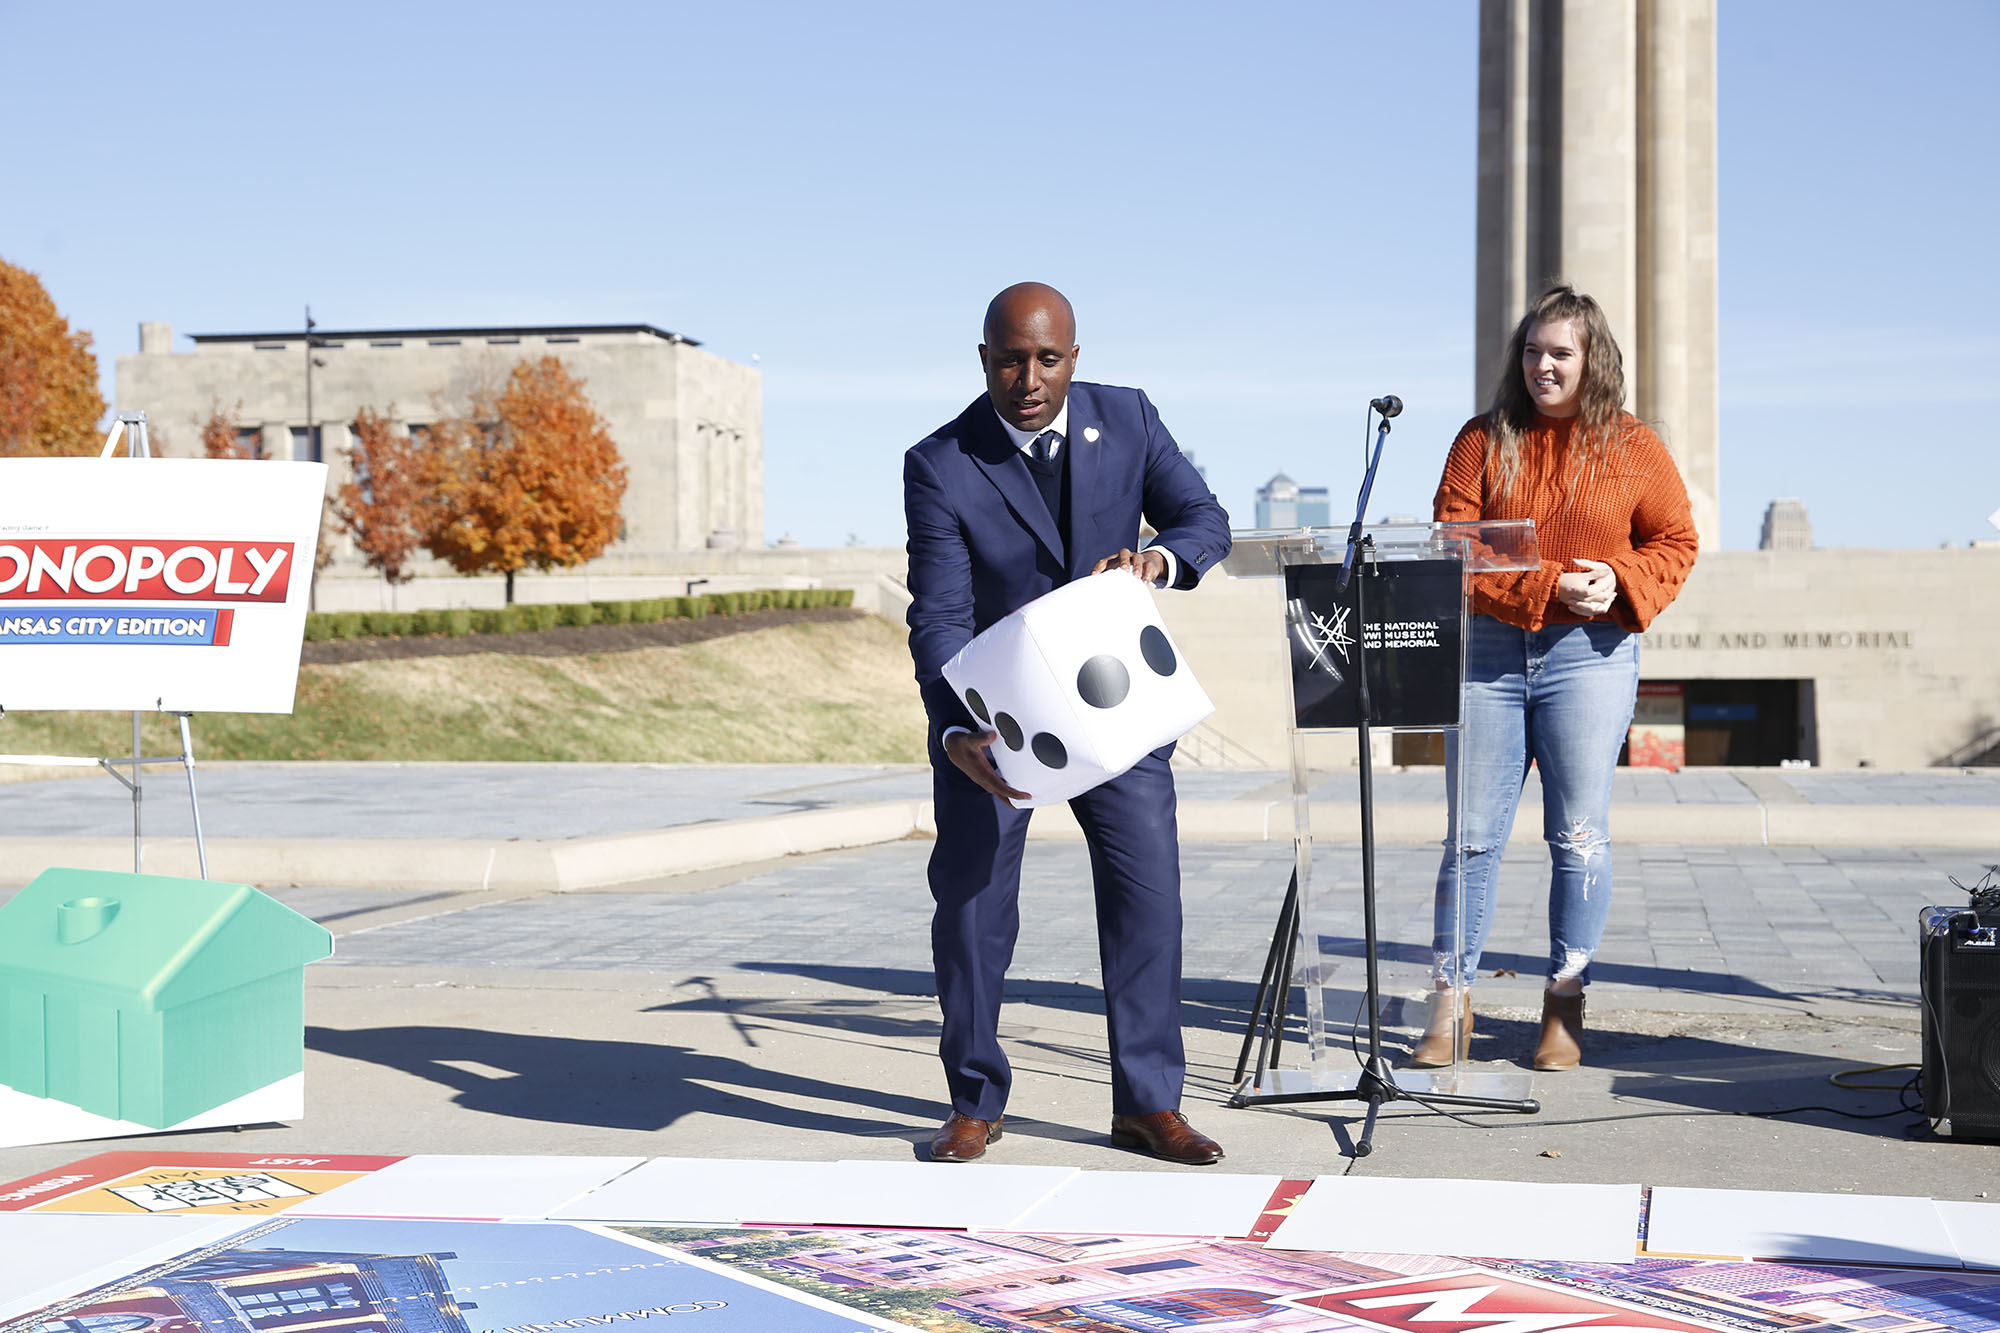 Modern photograph of Mayer Quinton Lucas, a Black man wearing a dark grey suit, about to roll an oversized die across an oversized game board in front of the Liberty Memorial Tower.